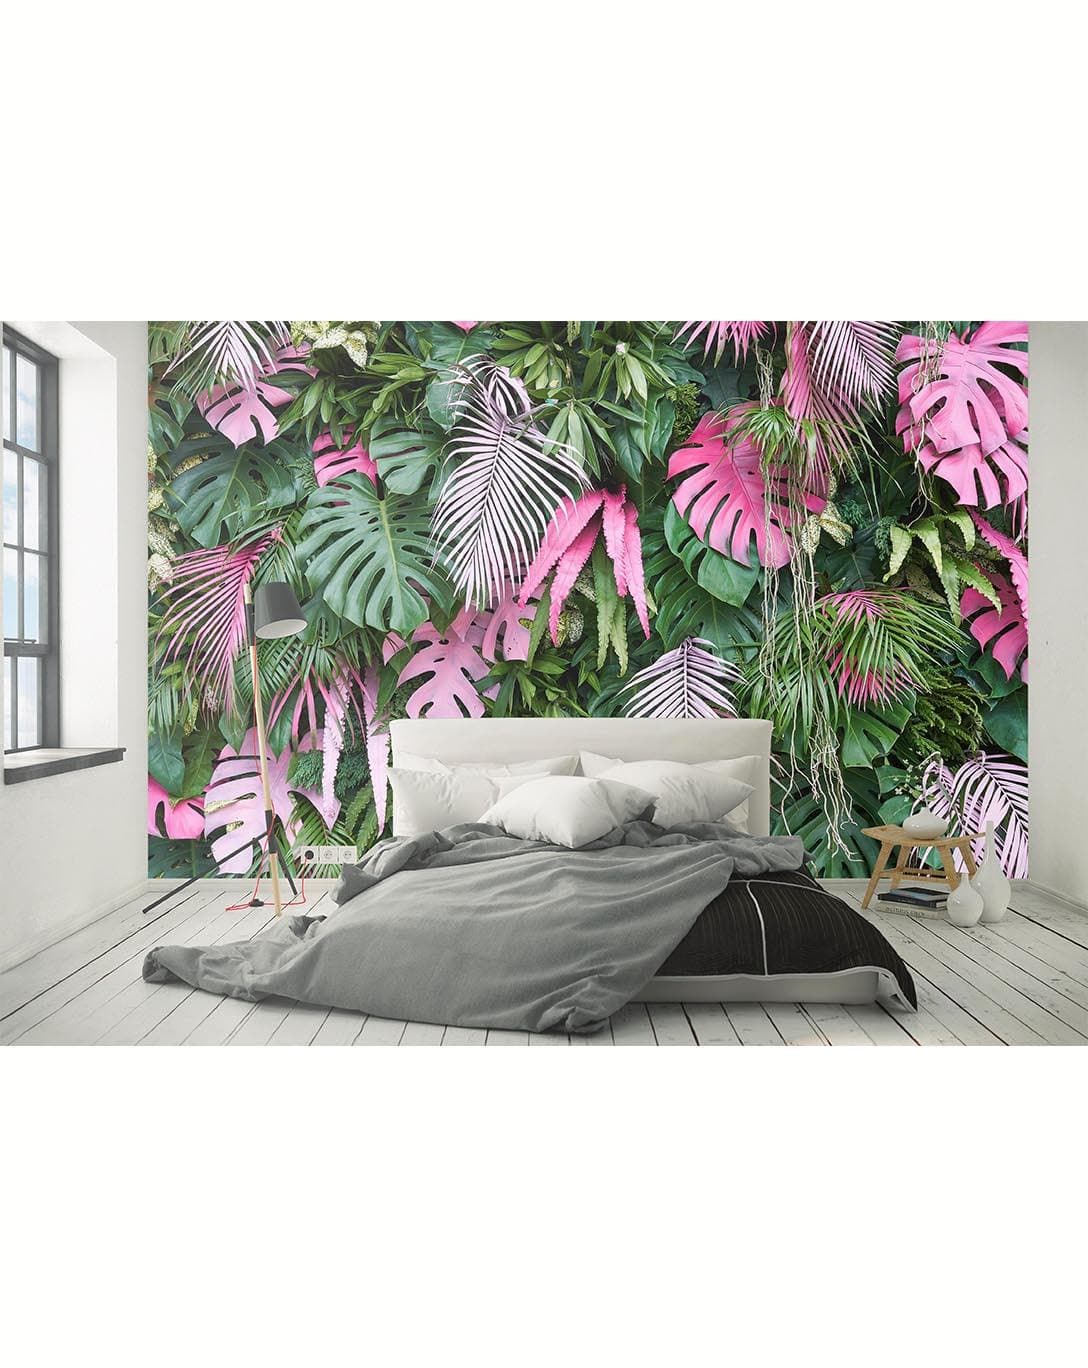 Floral Green Cactus Rose and Orchids Removable Wallpaper Colorful Tropical Palm Leaves Wall Mural Colorful Tropical Palm Leaves Wall Mural 